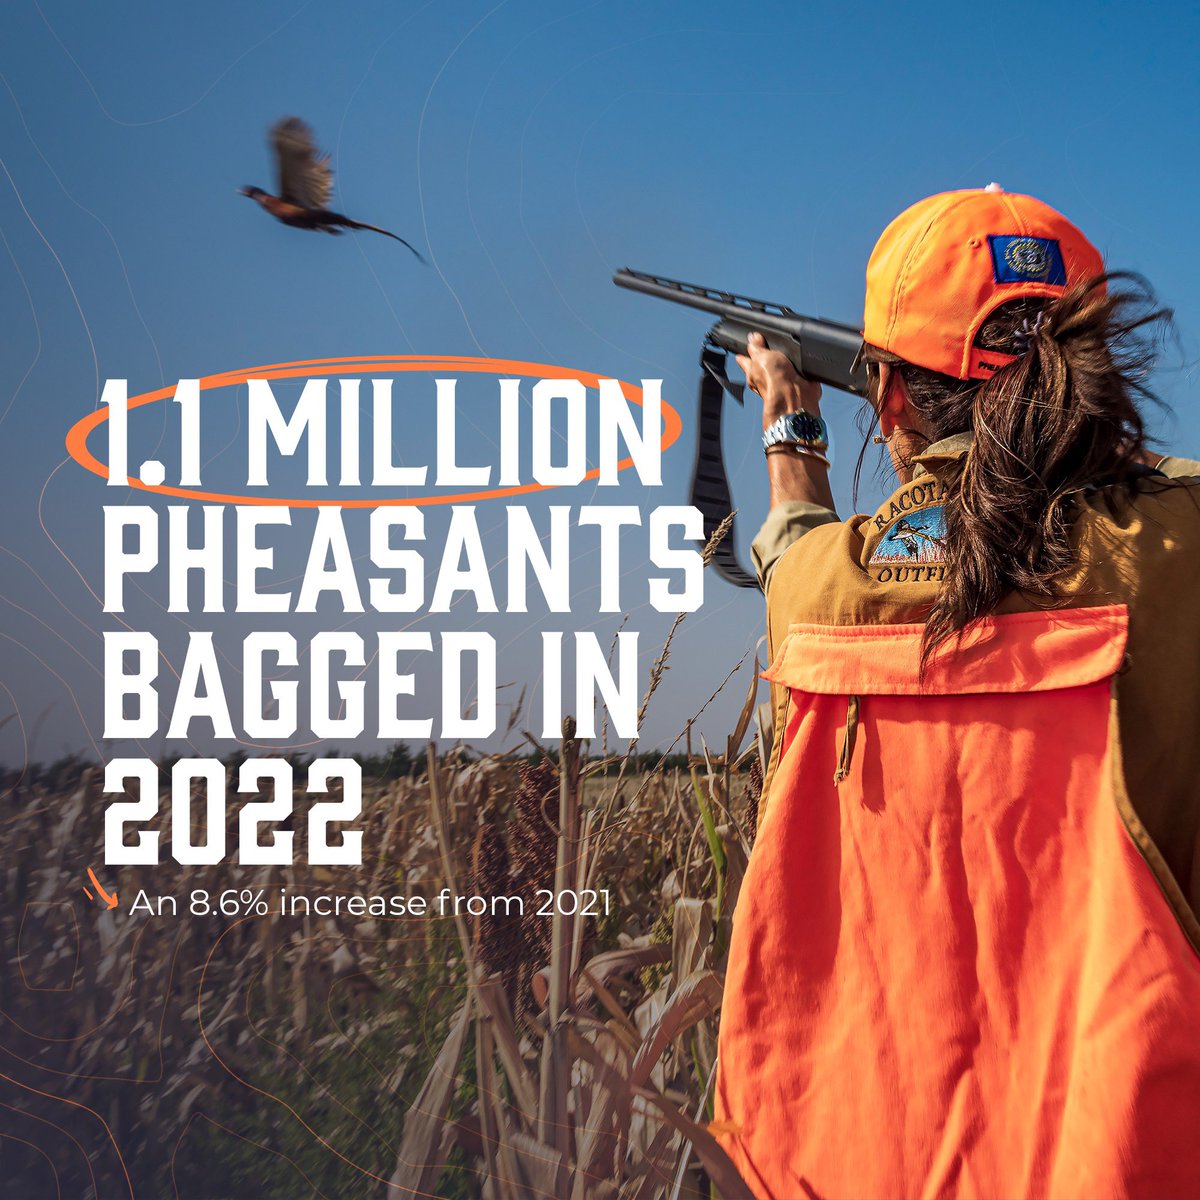 Another great year for South Dakota pheasant hunting!

Last year, over 1.1 million pheasants were bagged — an 8.6% increase from 2021’s season.

South Dakota has the best pheasant hunting in the world.